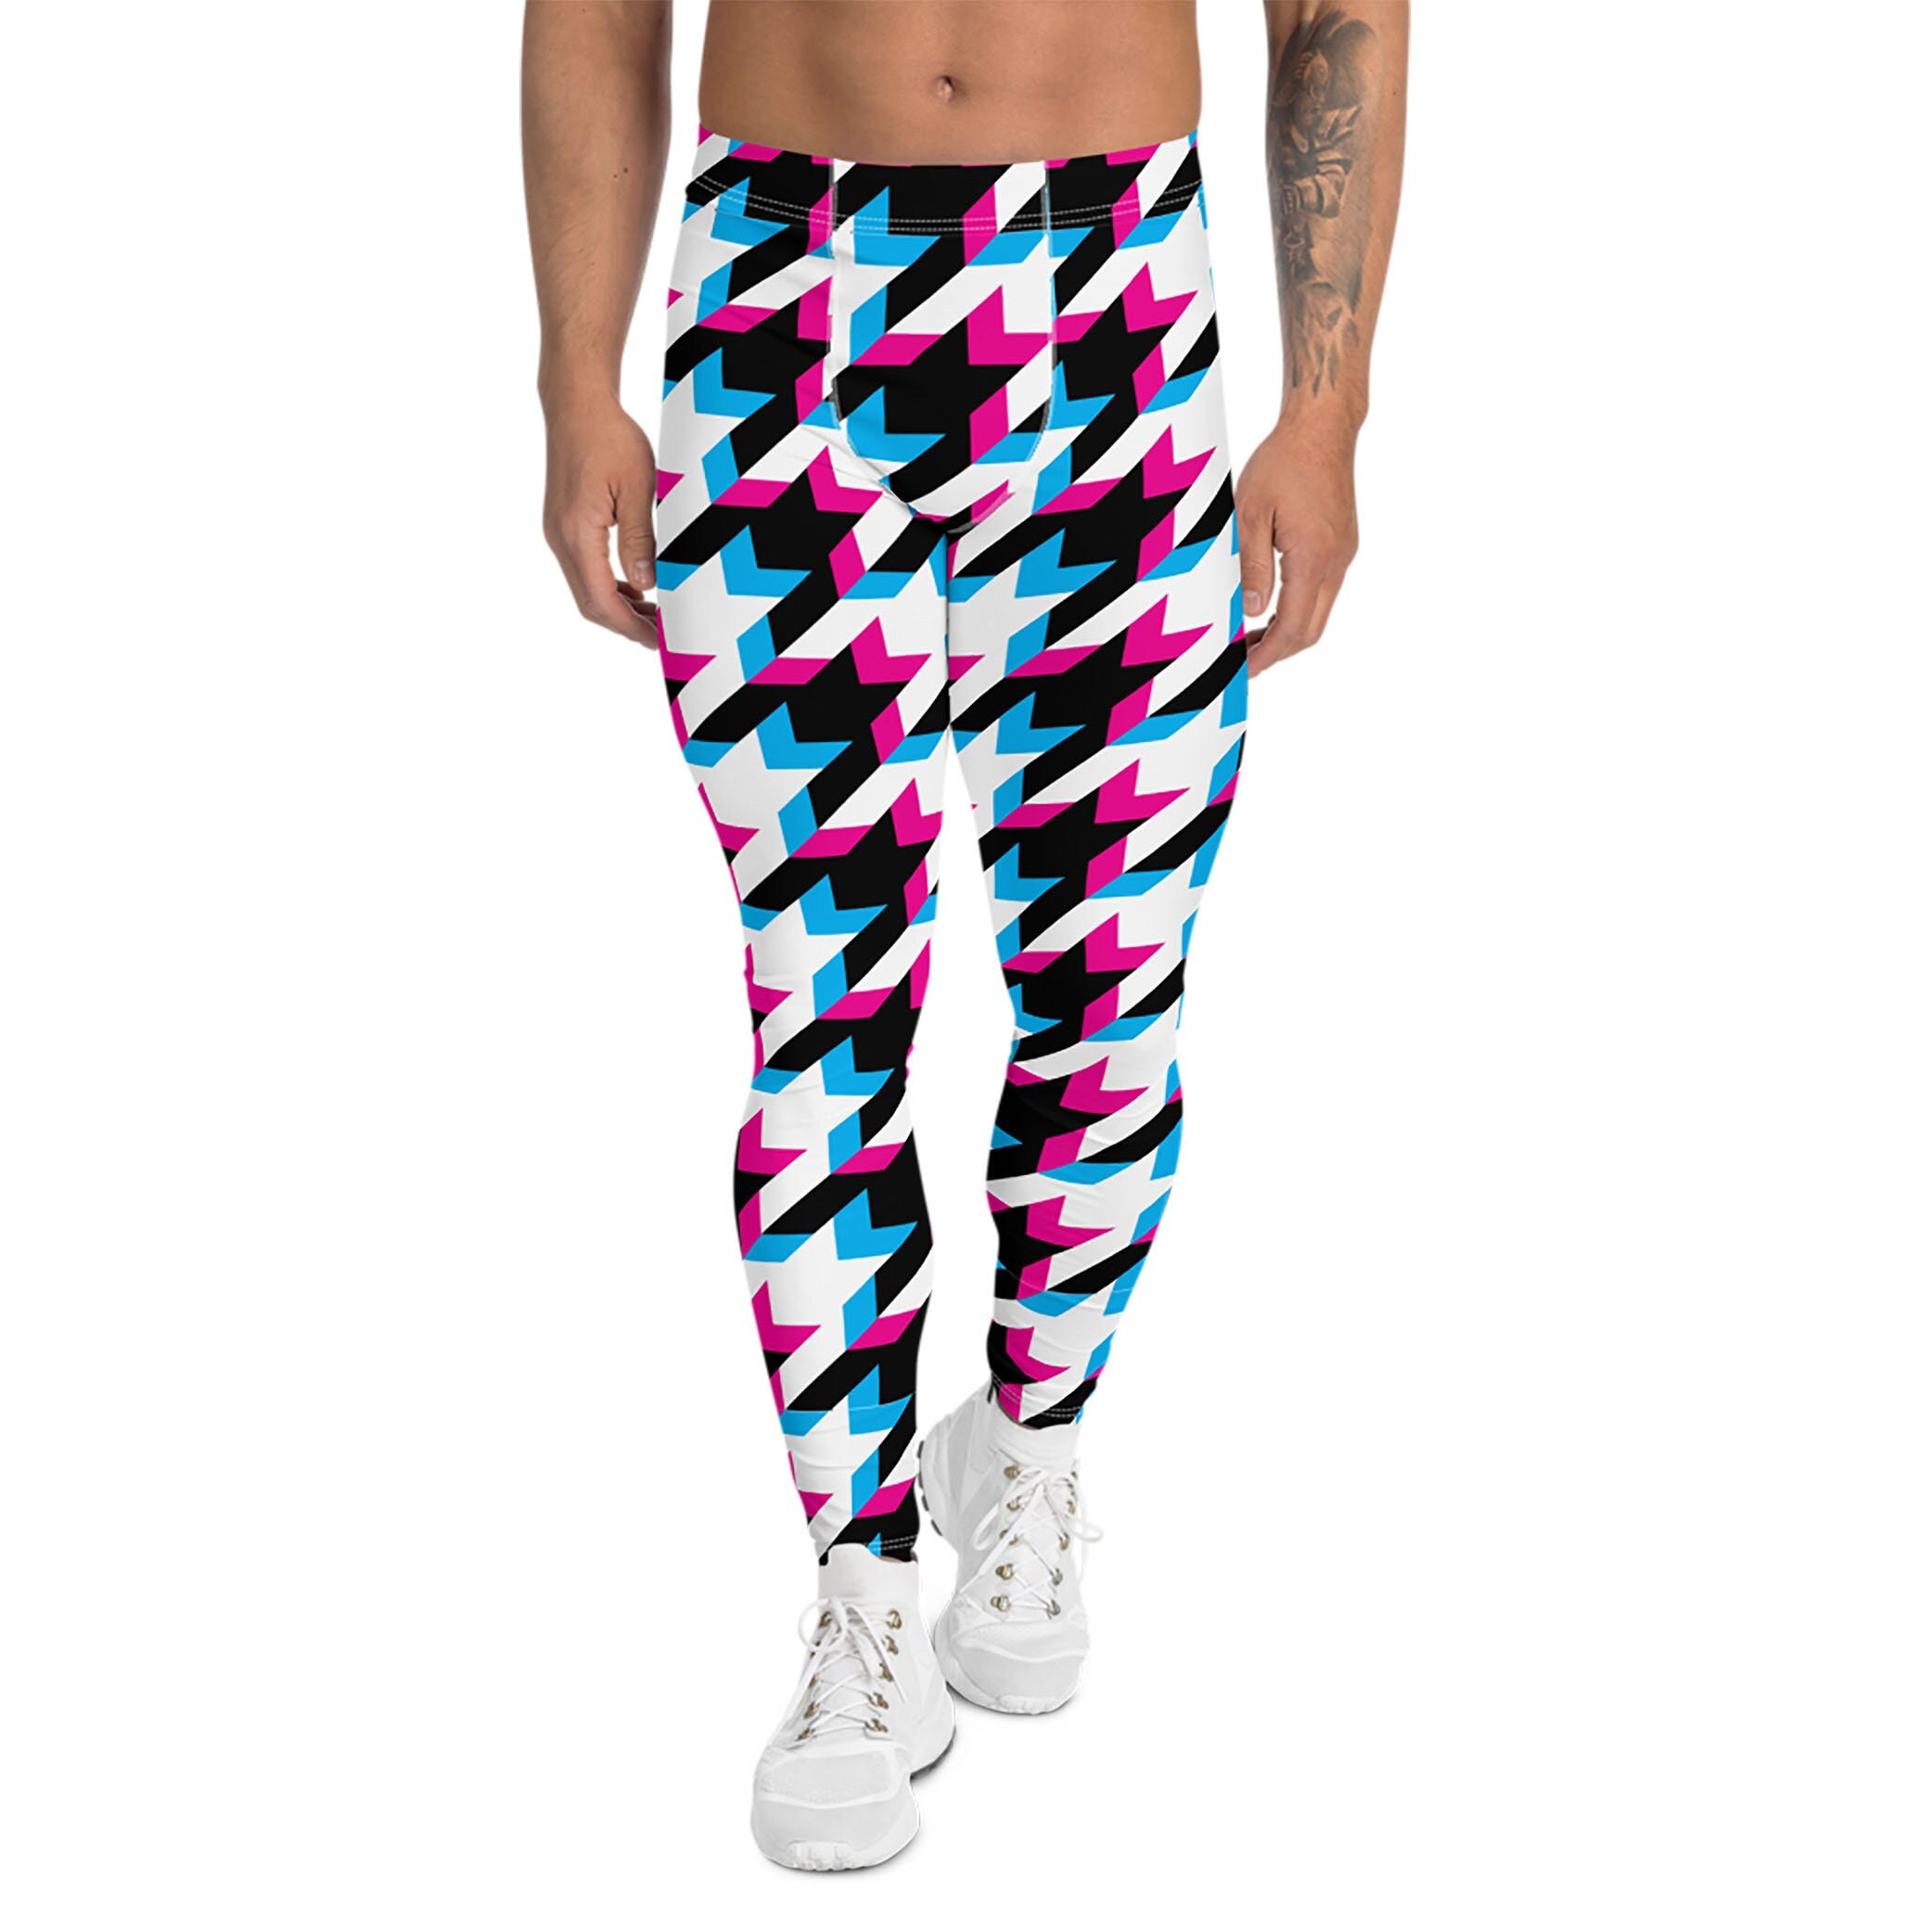 Houndstooth Womens Leggings All Over Print Purple Pink Houndstooth